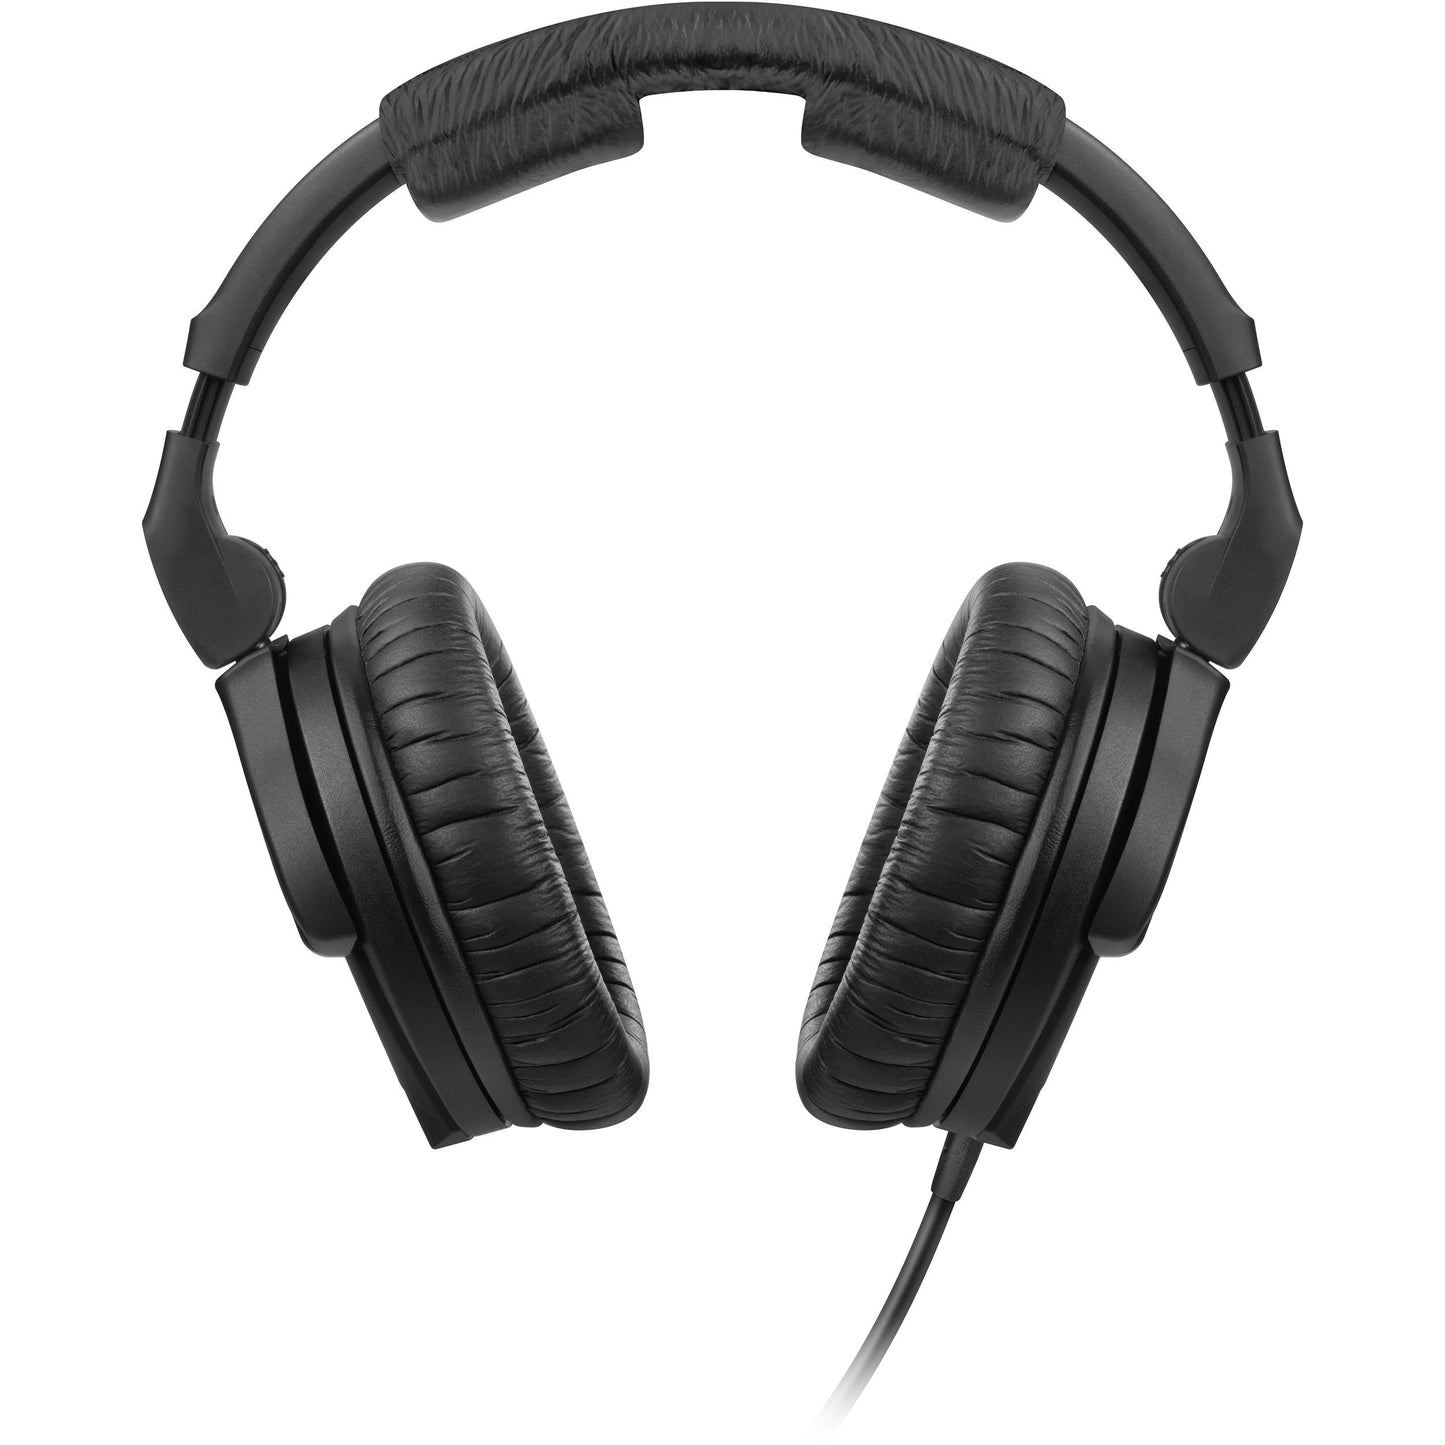 Sennheiser HD 280 PRO Circumaural Closed-Back Professional Monitor Headphones Foldable with 3m Coiled Cable High Ambient Noise Attenuation (New Model)